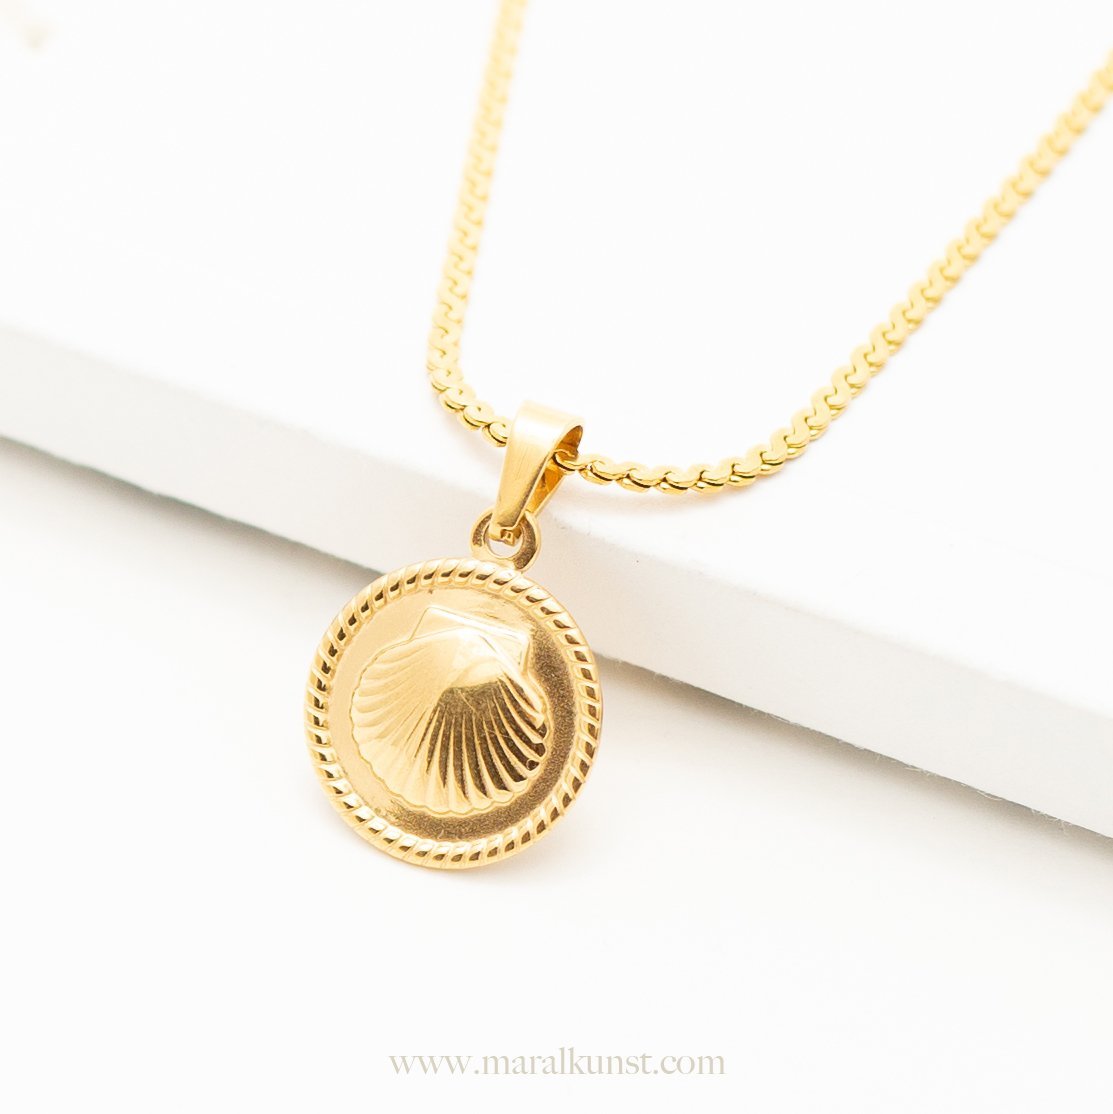 Seas The Day Seashell Necklace - Maral Kunst Jewelry